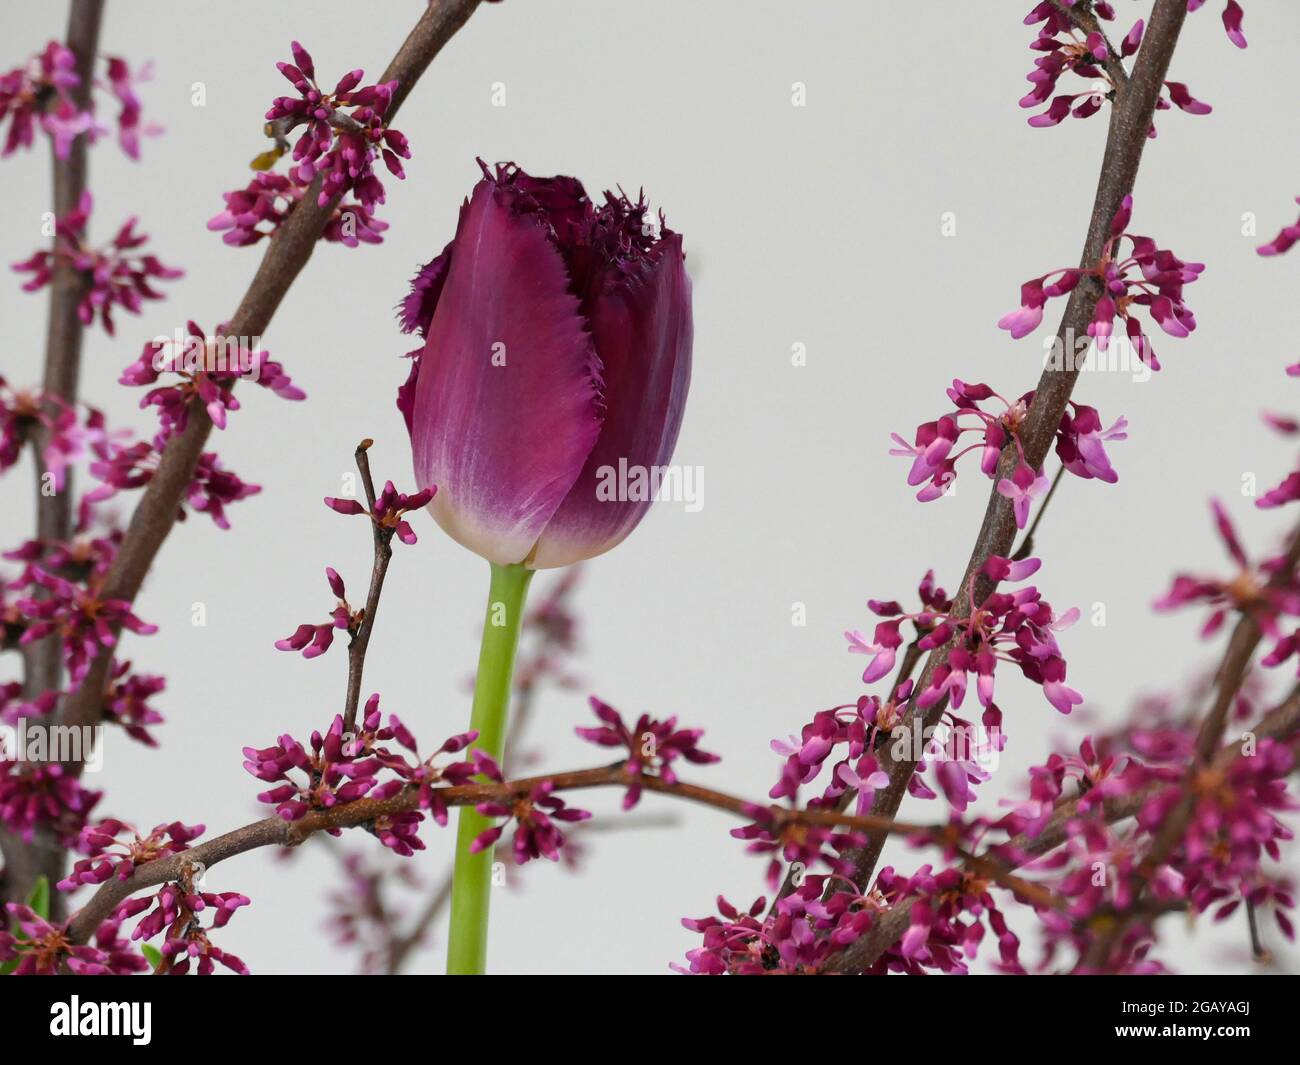 Purple Crystal Tulips Tulipa with a Creamy White Base and Fringed Petals among RedBud Tree Branches with Tiny Pink/Purple Flowers for a Spring Scene Stock Photo